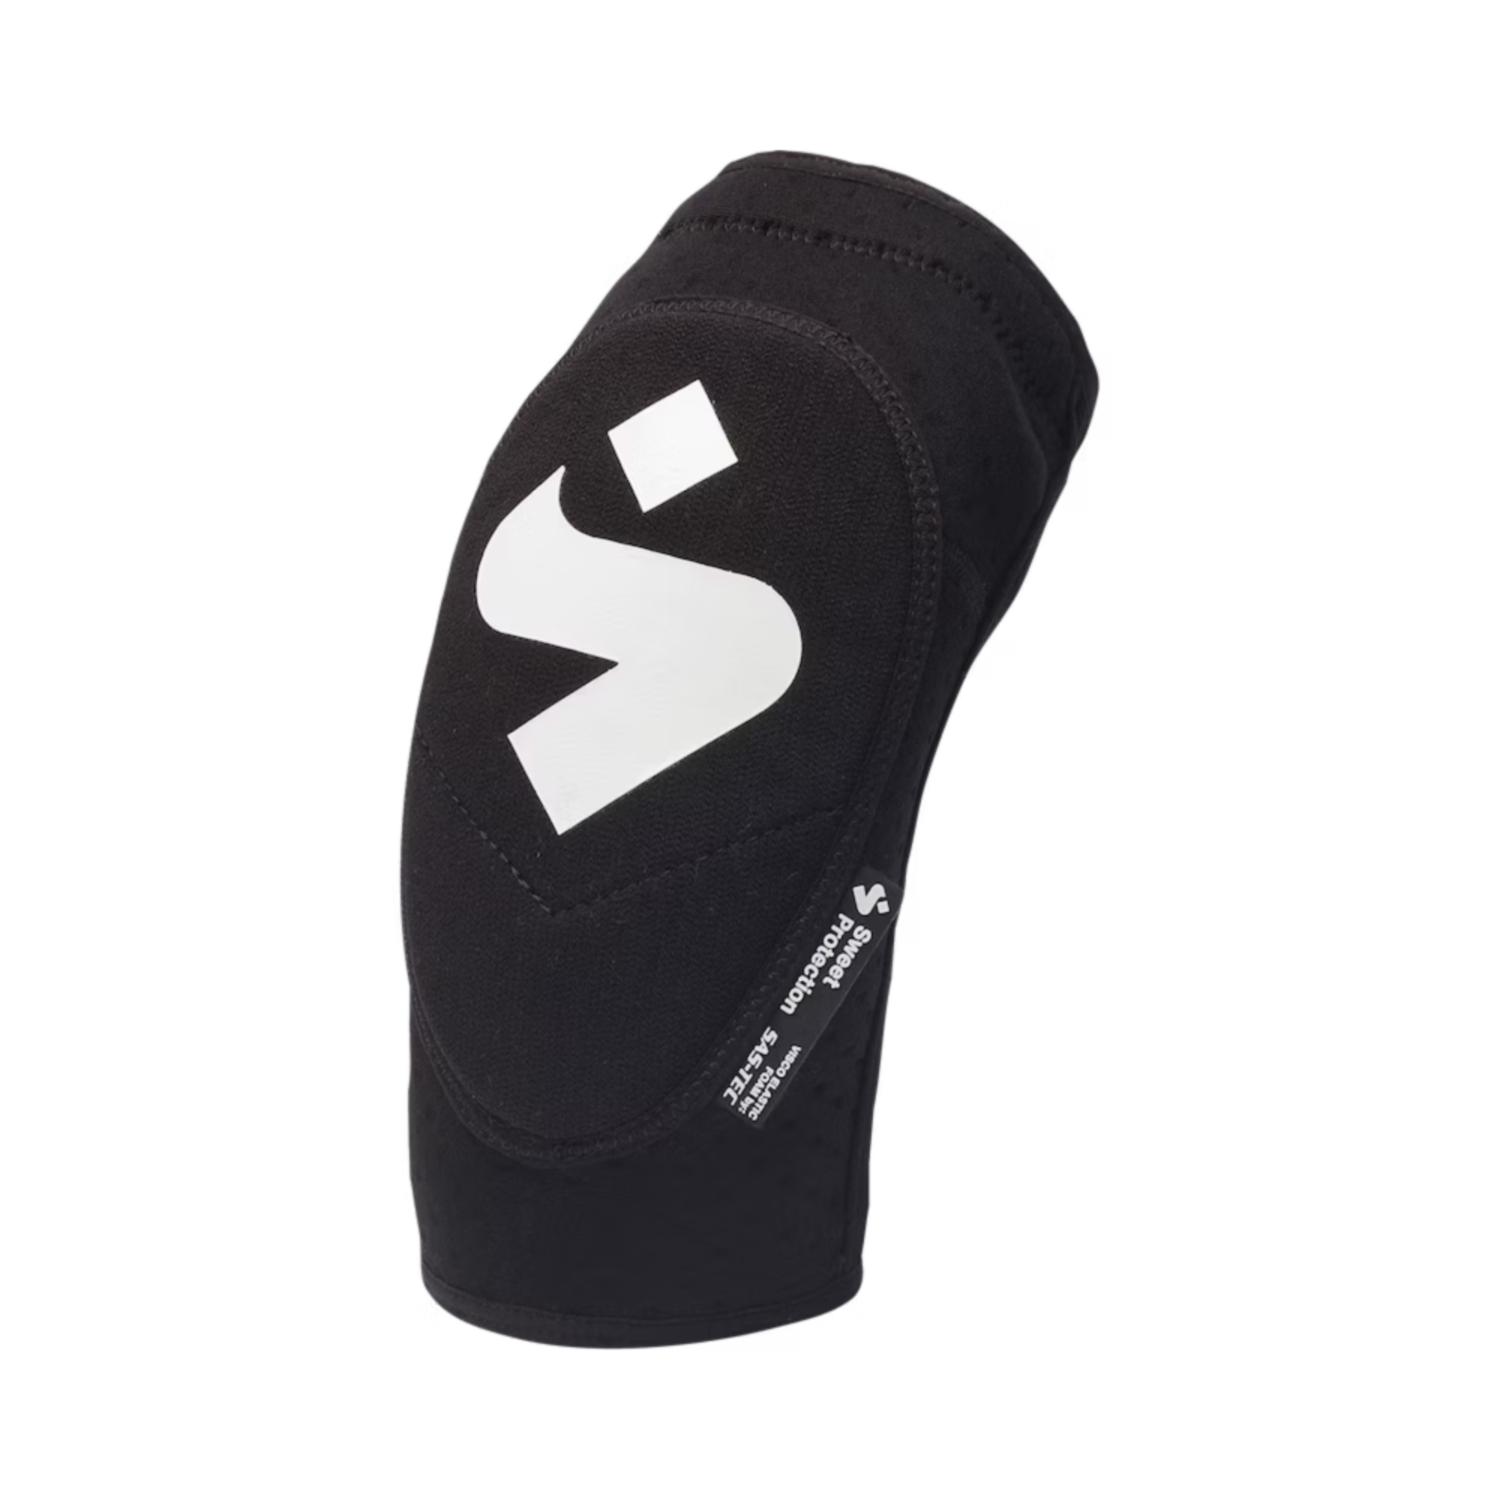 Protège-coude Elbow Guards (paire) - Hors Circuits